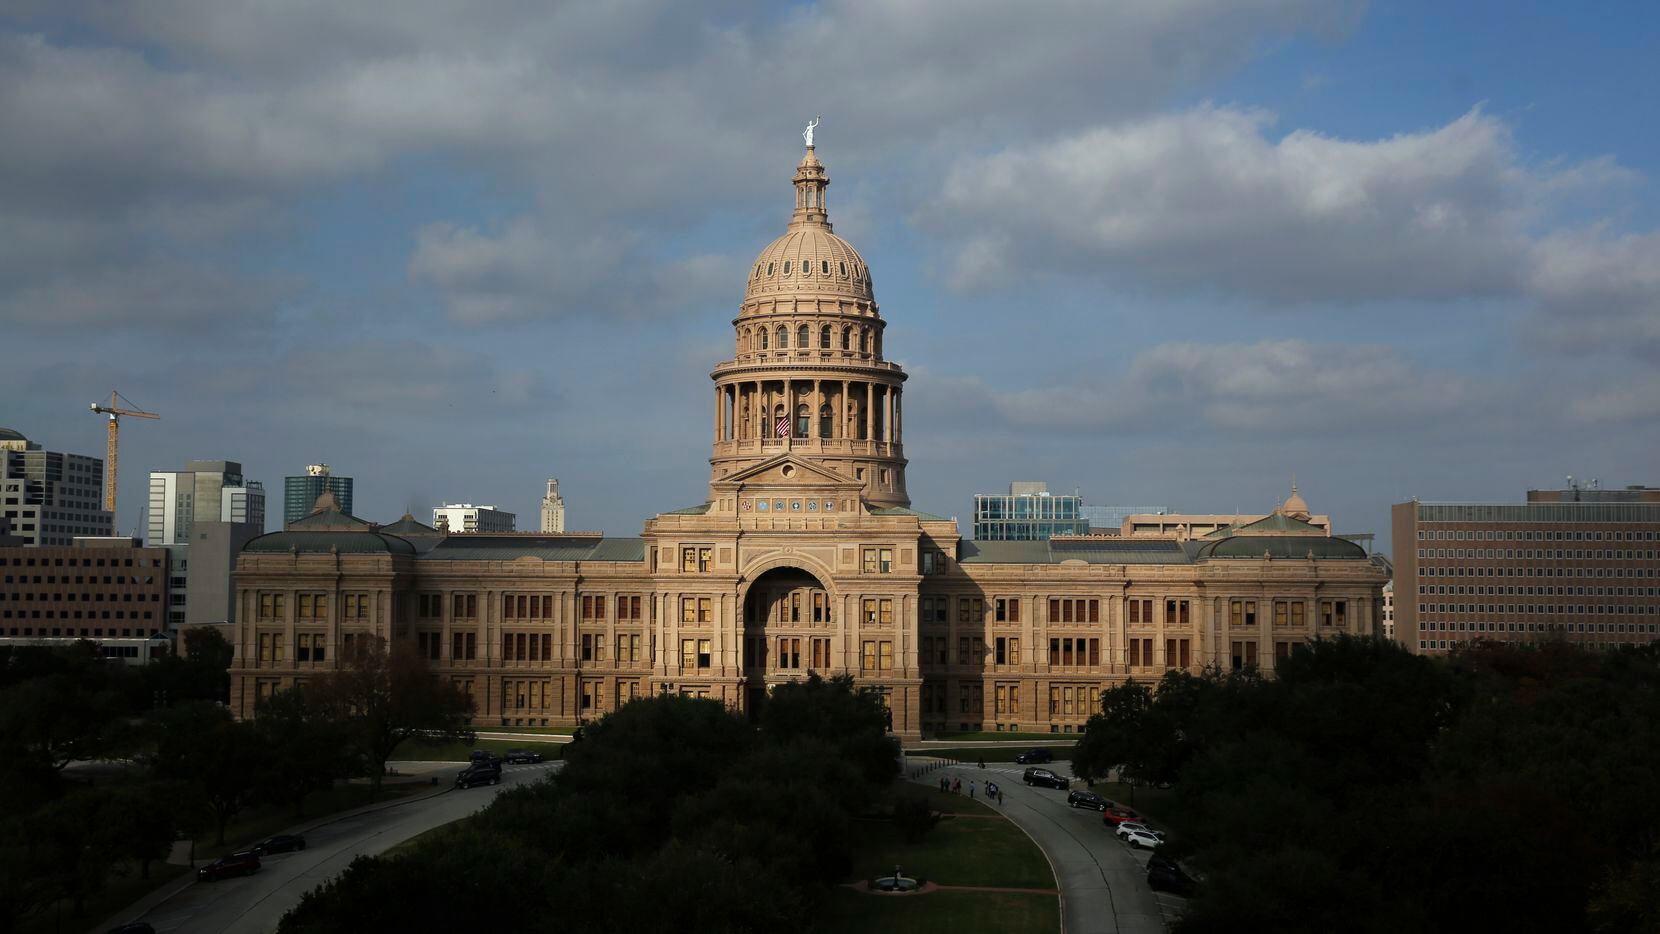 The candidates for Texas governor may have toned down overt politicking after the Uvalde...